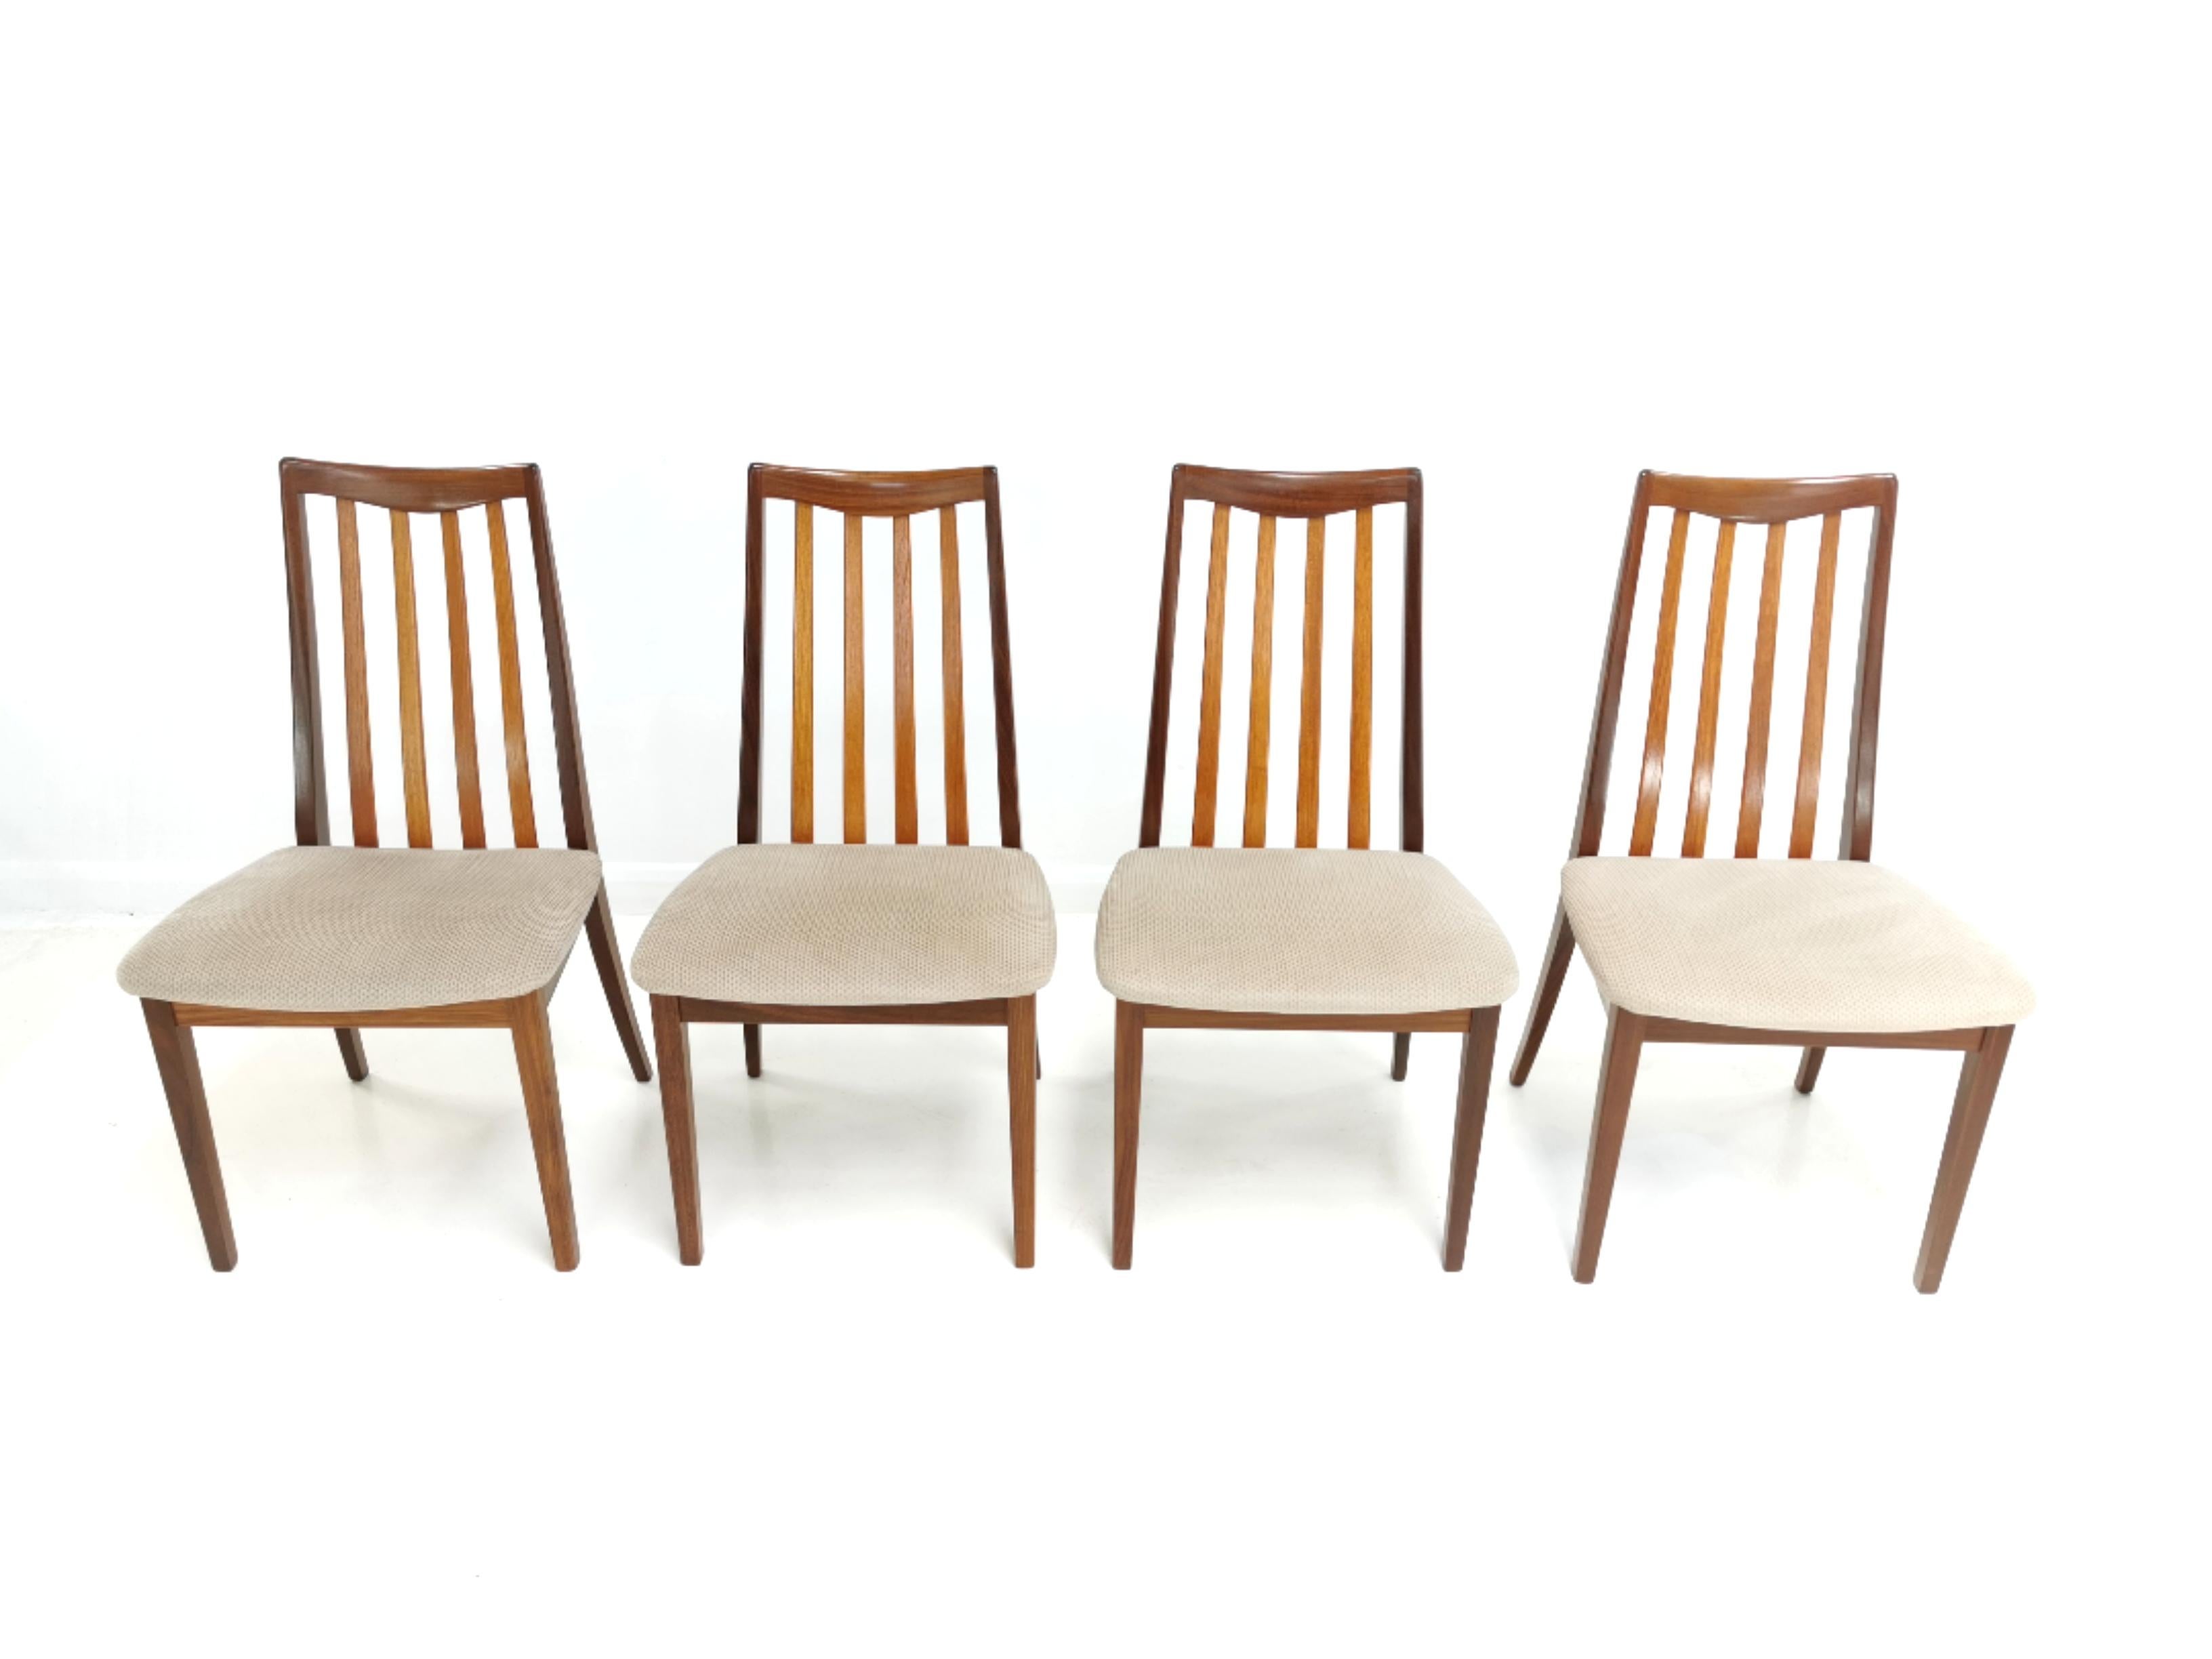 20th Century Vintage Teak Dining Chairs by Leslie Dandy for G-Plan, 1960s, Set of 4